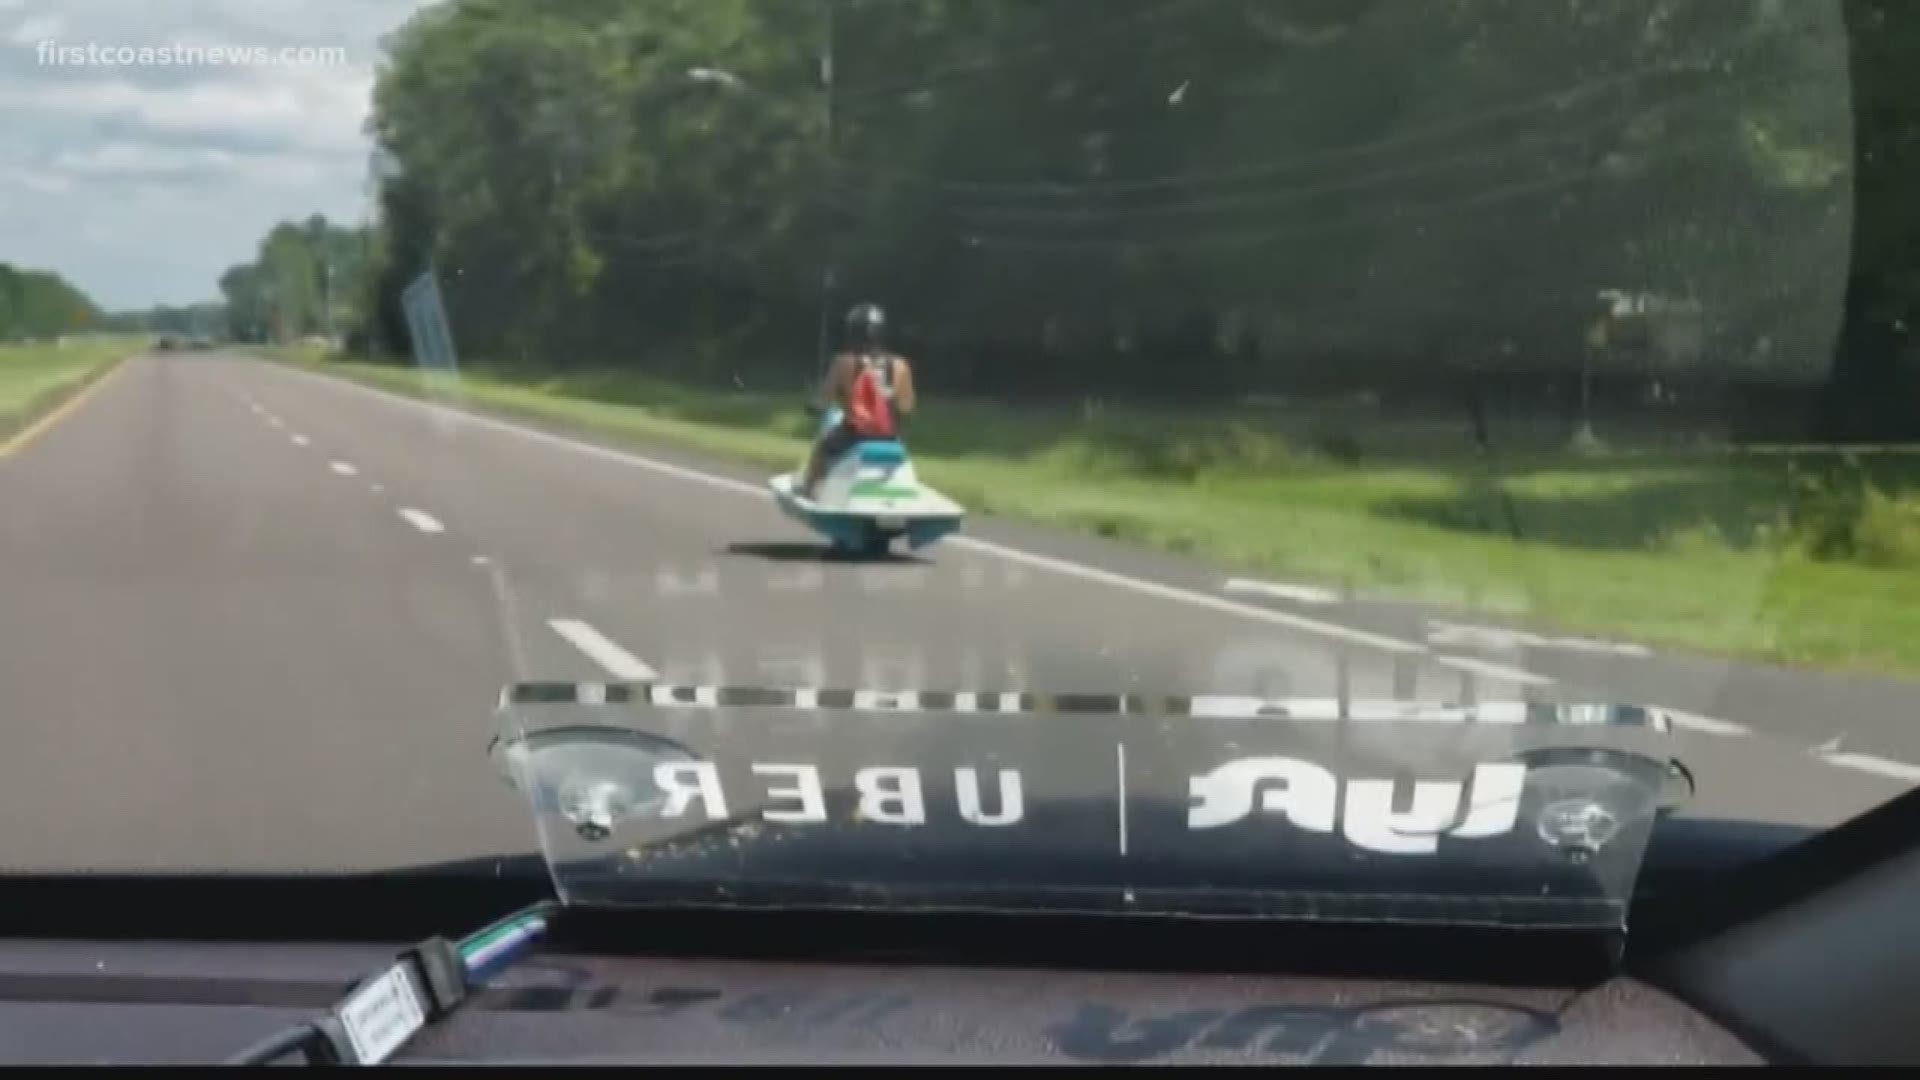 A man was seen driving his jet ski down a Westside road, Tuesday afternoon.